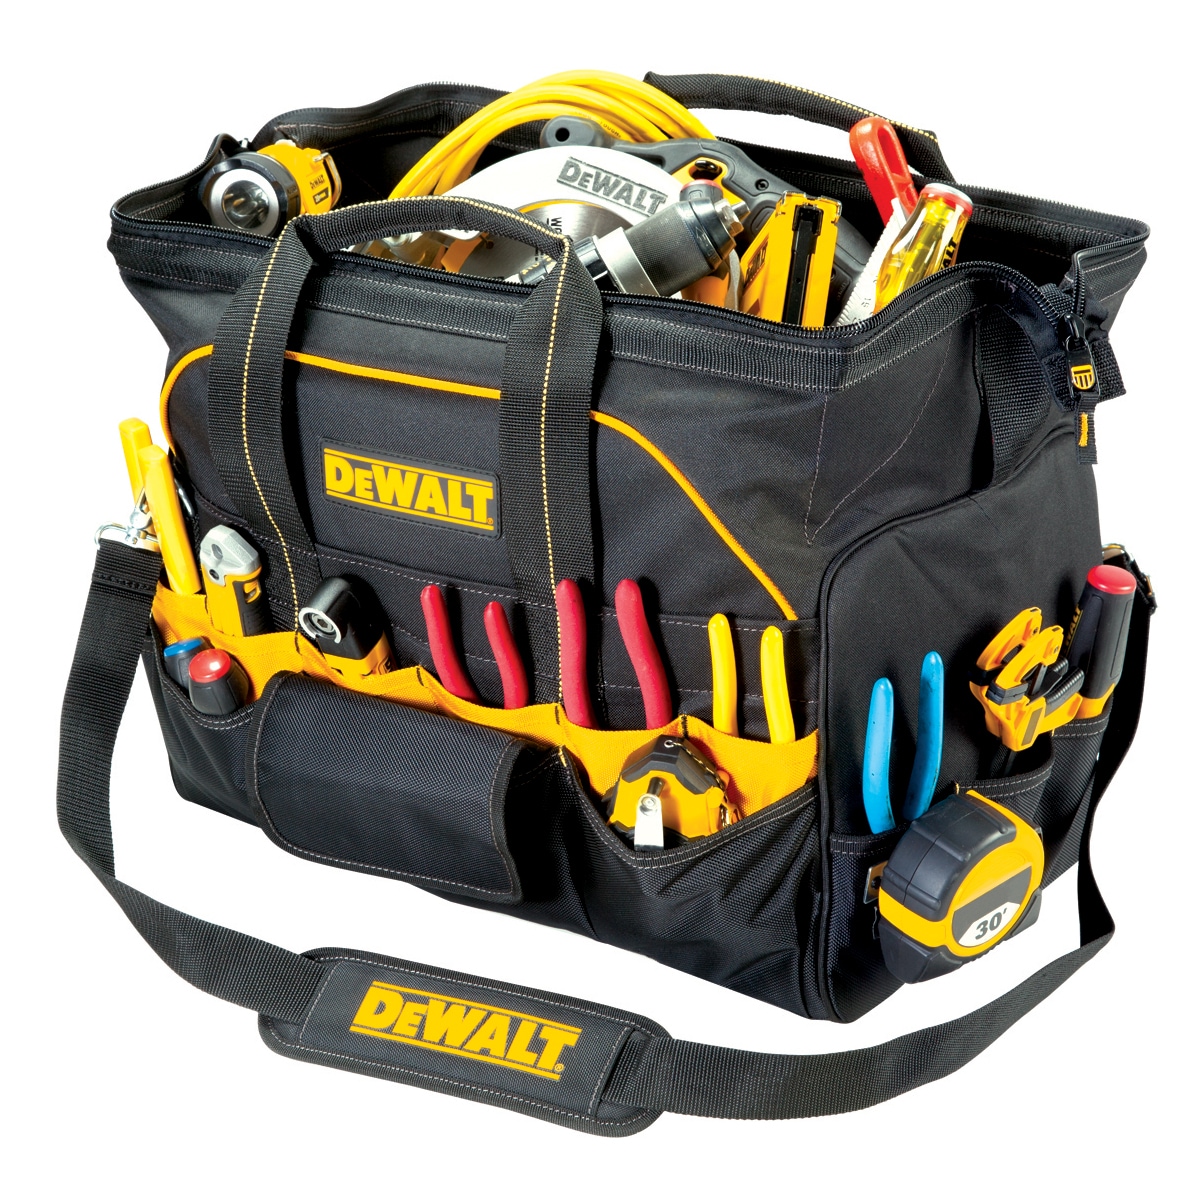 Dewalt Heavy Duty Tool Bag for power tools 18inch Bag yellow and black 2 Pack 